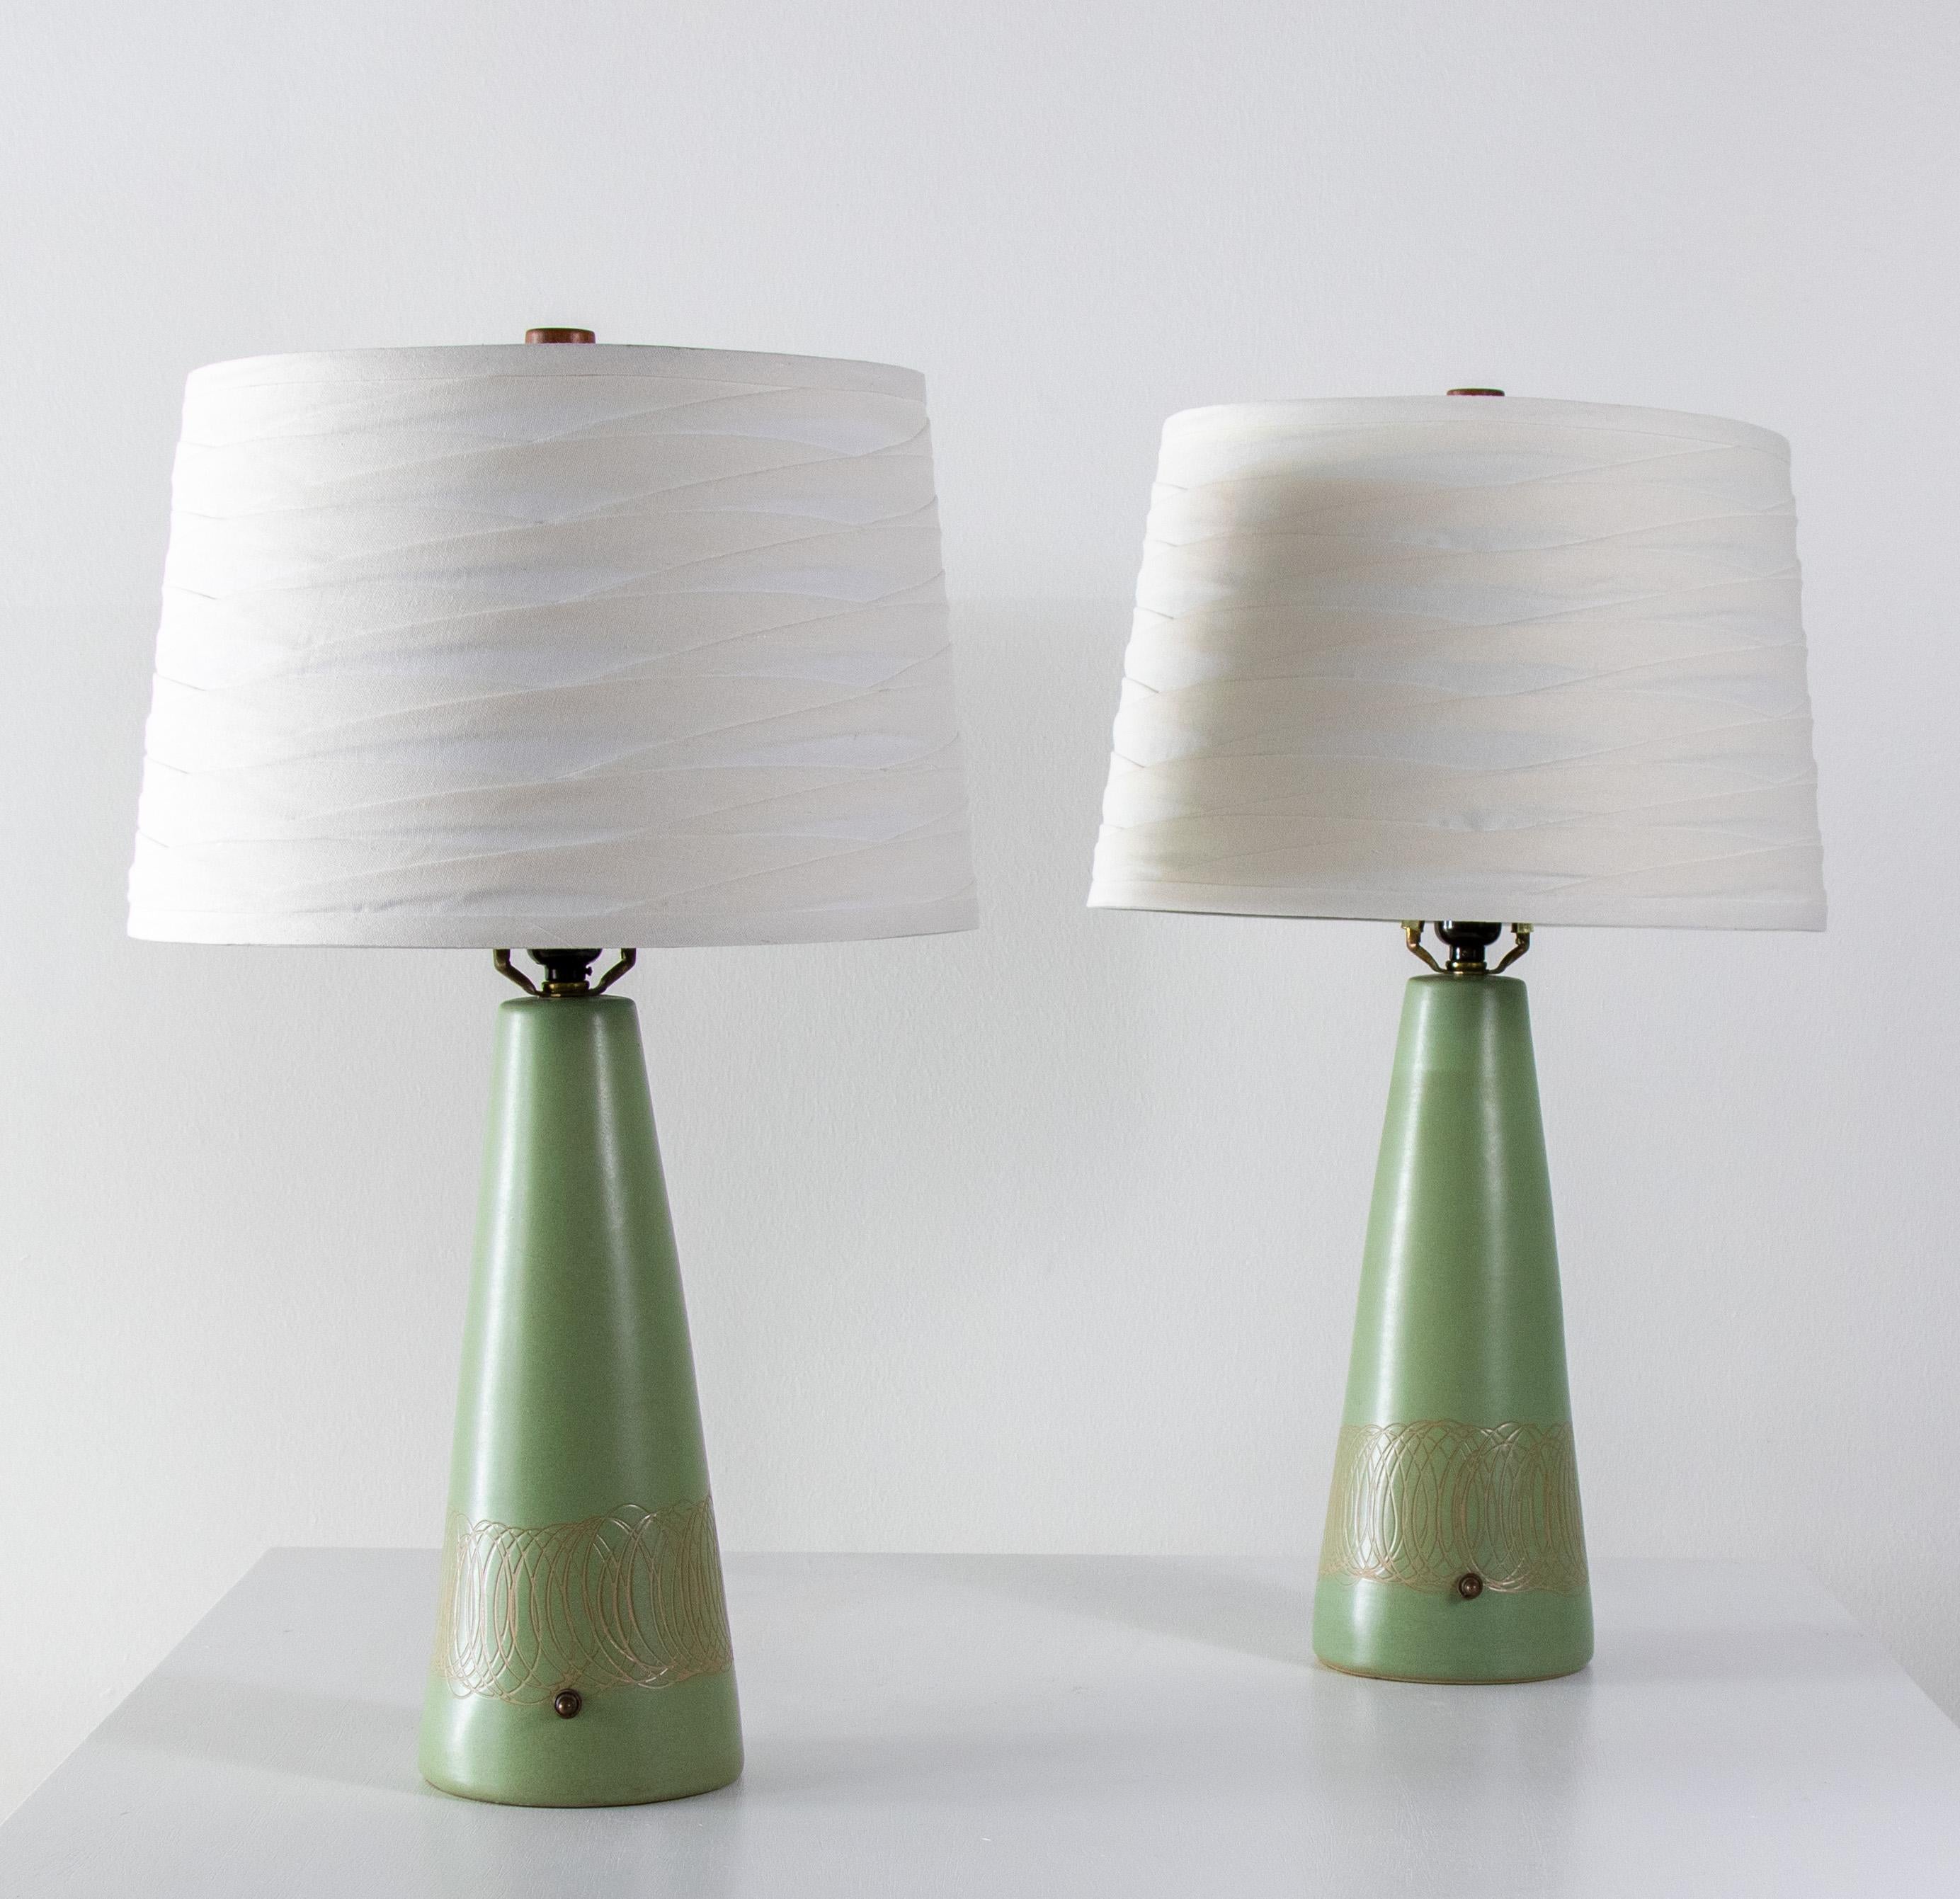 A pair of seafoam green lamps designed by Jane and Gordon Martz of Marshall Studios in Veedersburg Indiana. These lamps are highly sought after and are showing up in designs all over the world. Blending sophistication and modern these lamps are sure